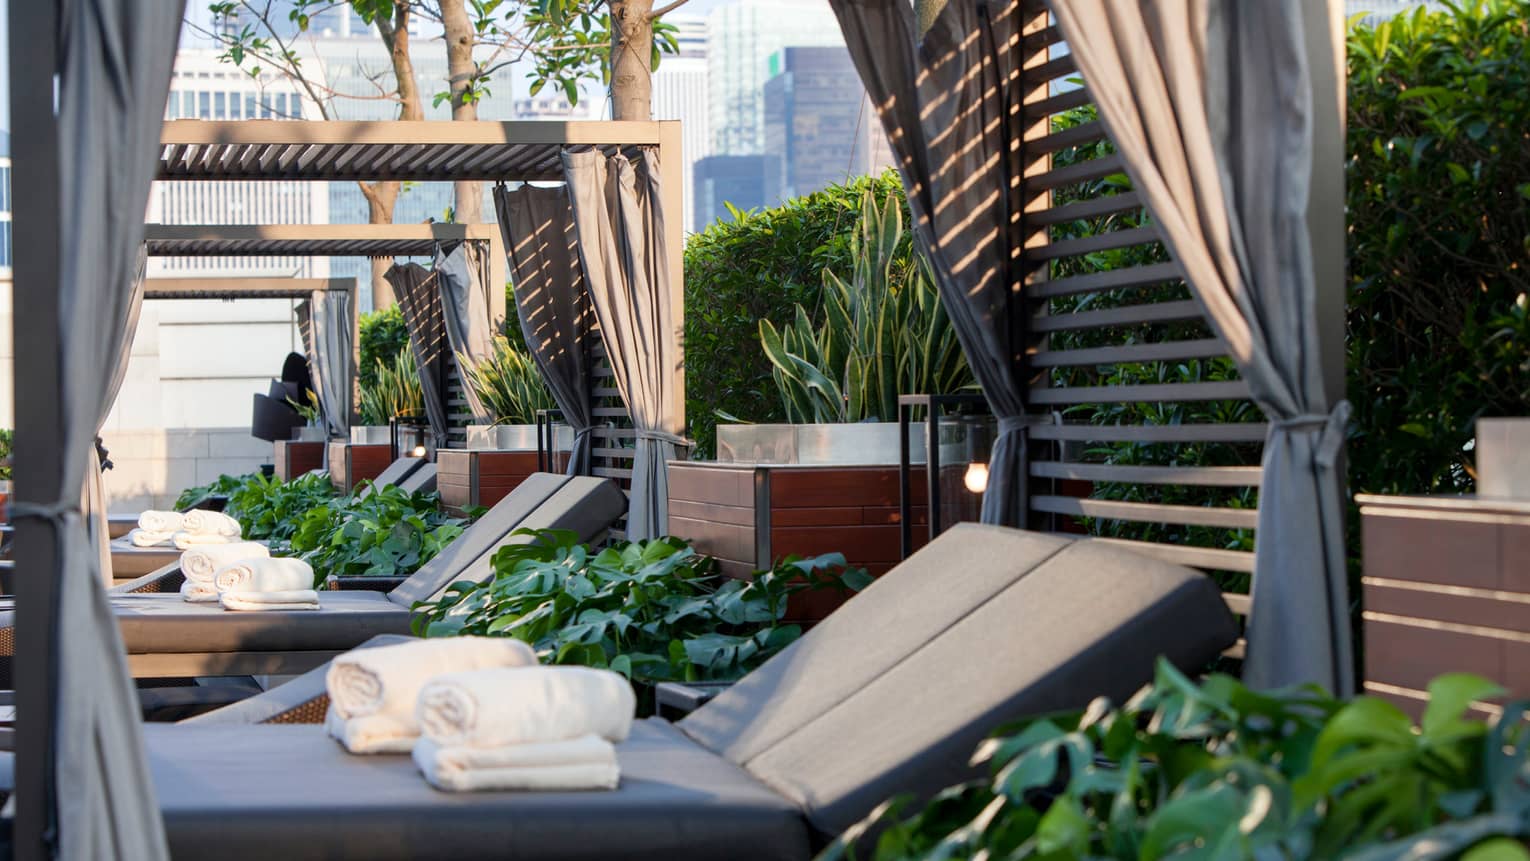 Patio lounge chairs side-by-side on deck with tropical plants, rolled white towels on grey cushions